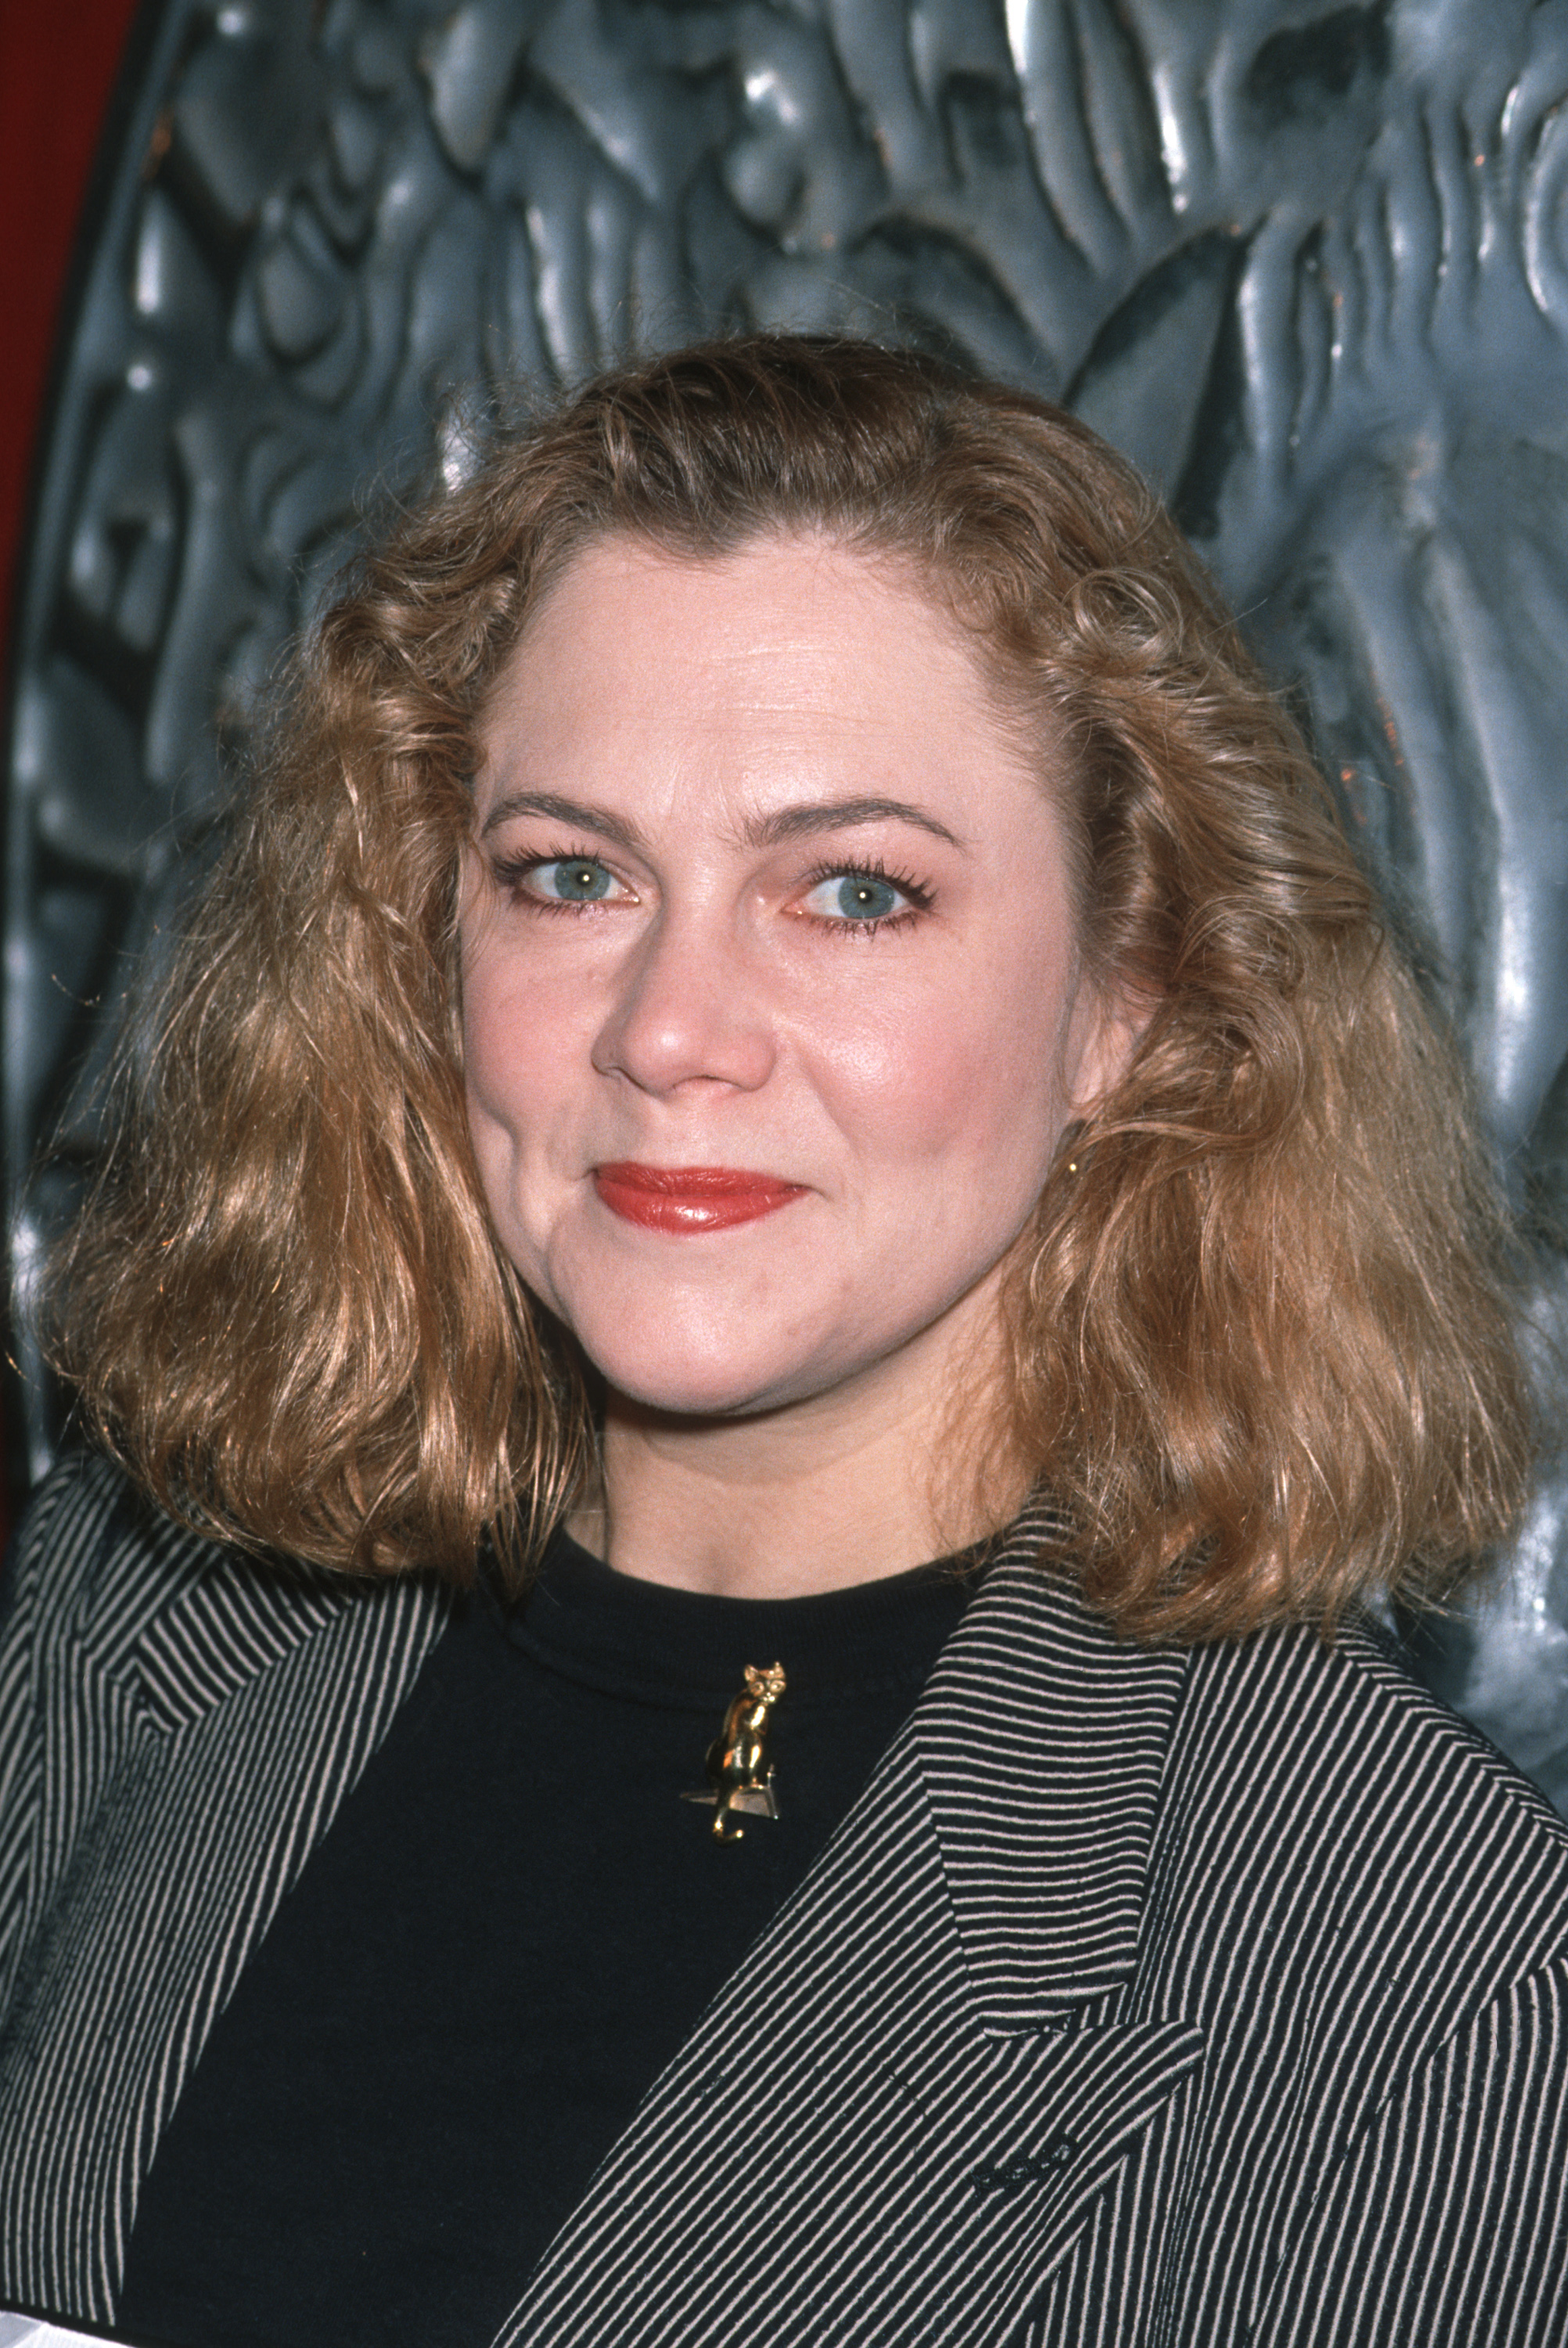 Kathleen Turner during Tony Awards Brunch Party at Sardi's Restaurant on May 16, 1990 in New York City. | Source: Getty Images